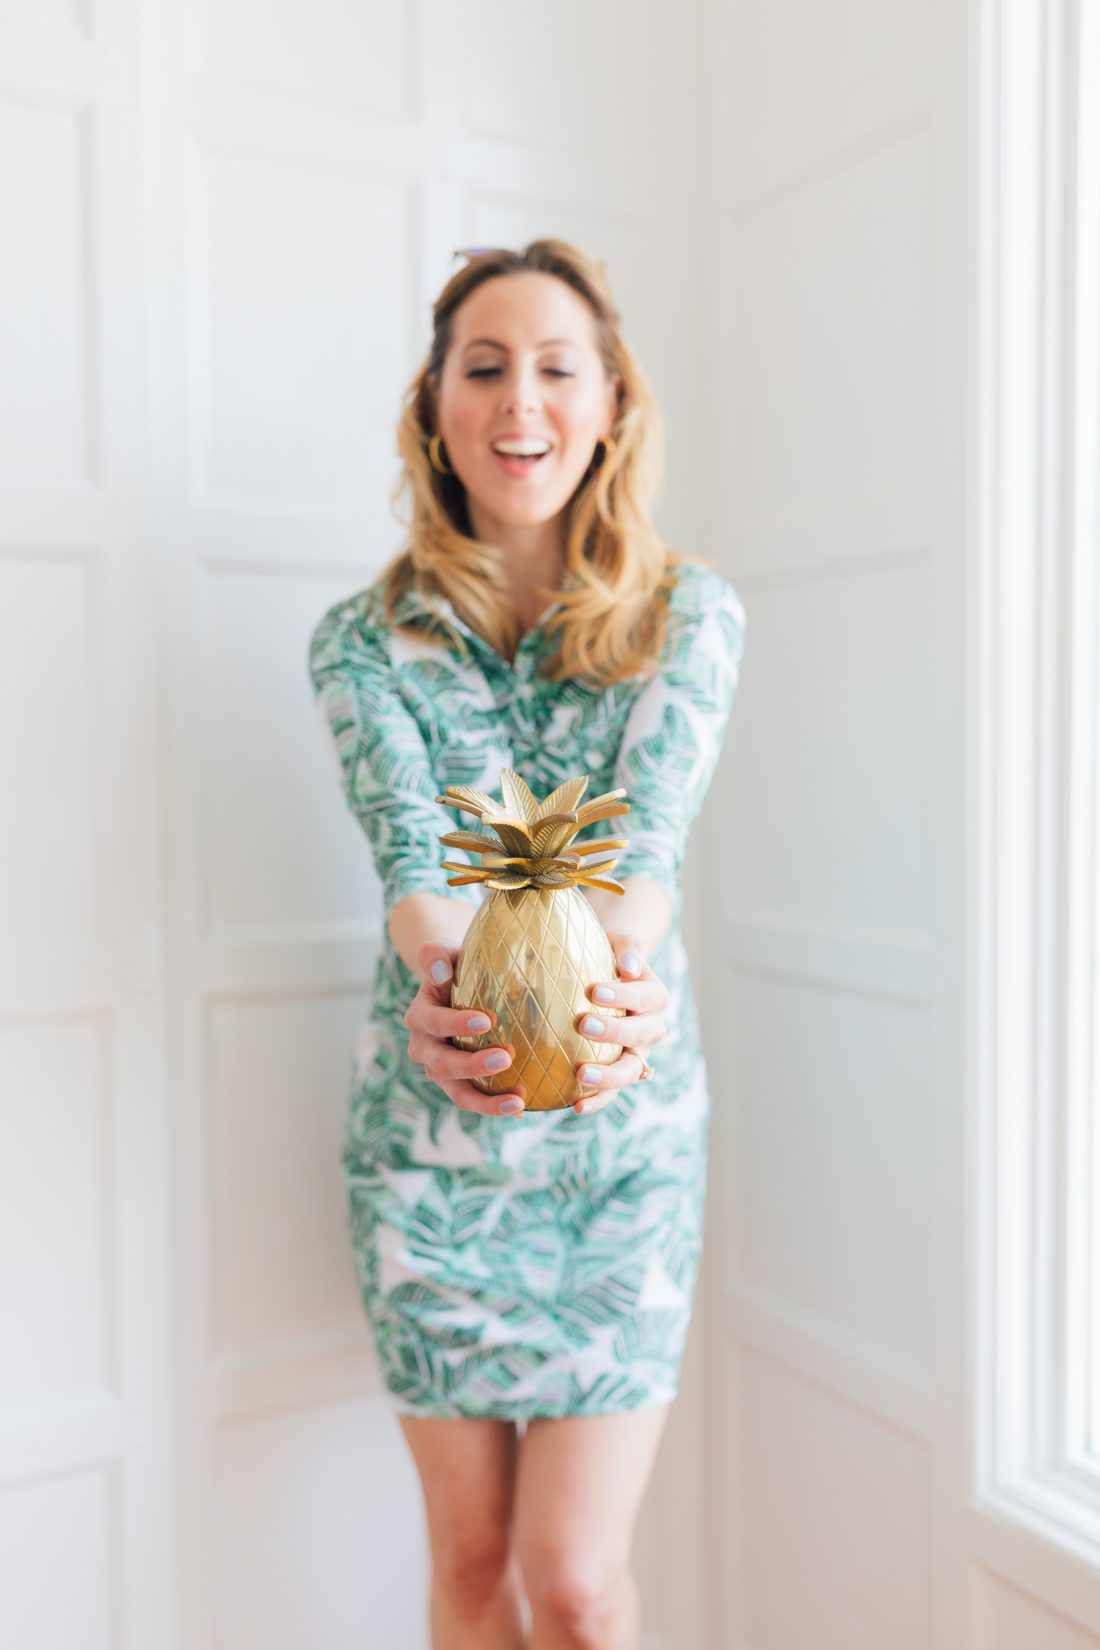 Eva Amurri Martino of Happily Eva After wears a green floral dress and shares her Jamaica packing list